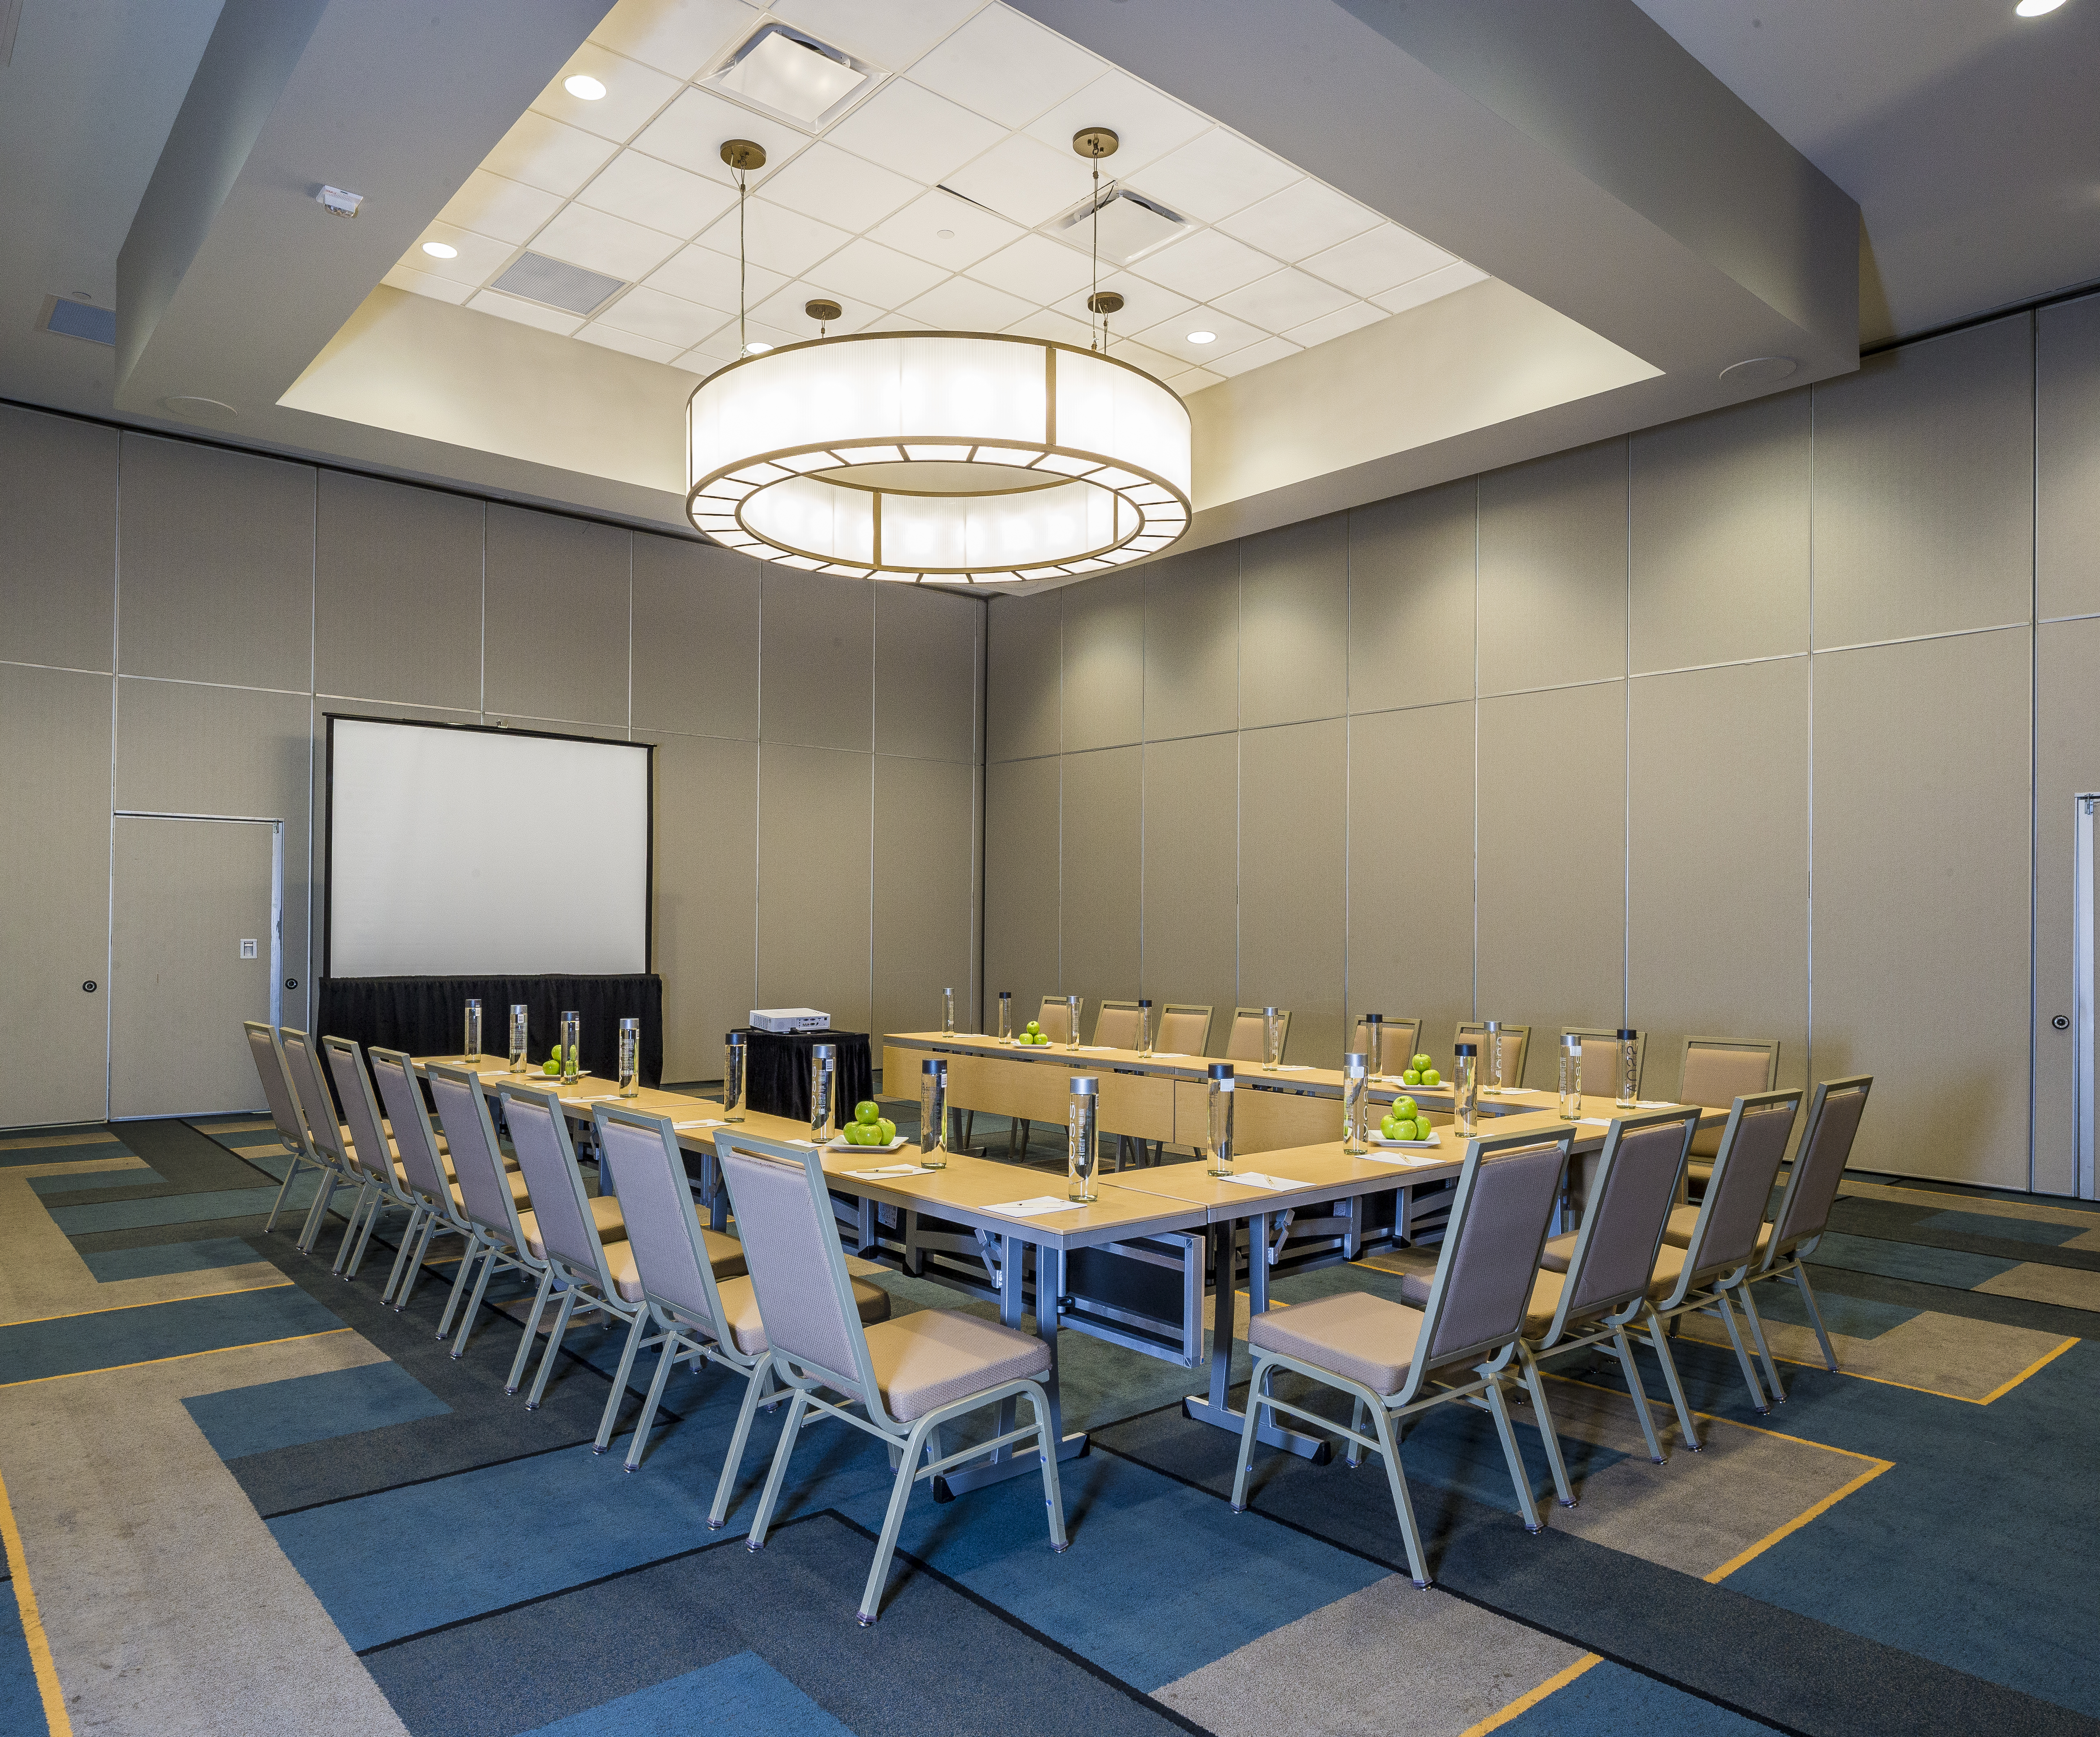 Meeting Room With Water Bottles and Bowls of Green Apples on U-Shaped Table, Chairs, Projector Table, and Presentation Screen